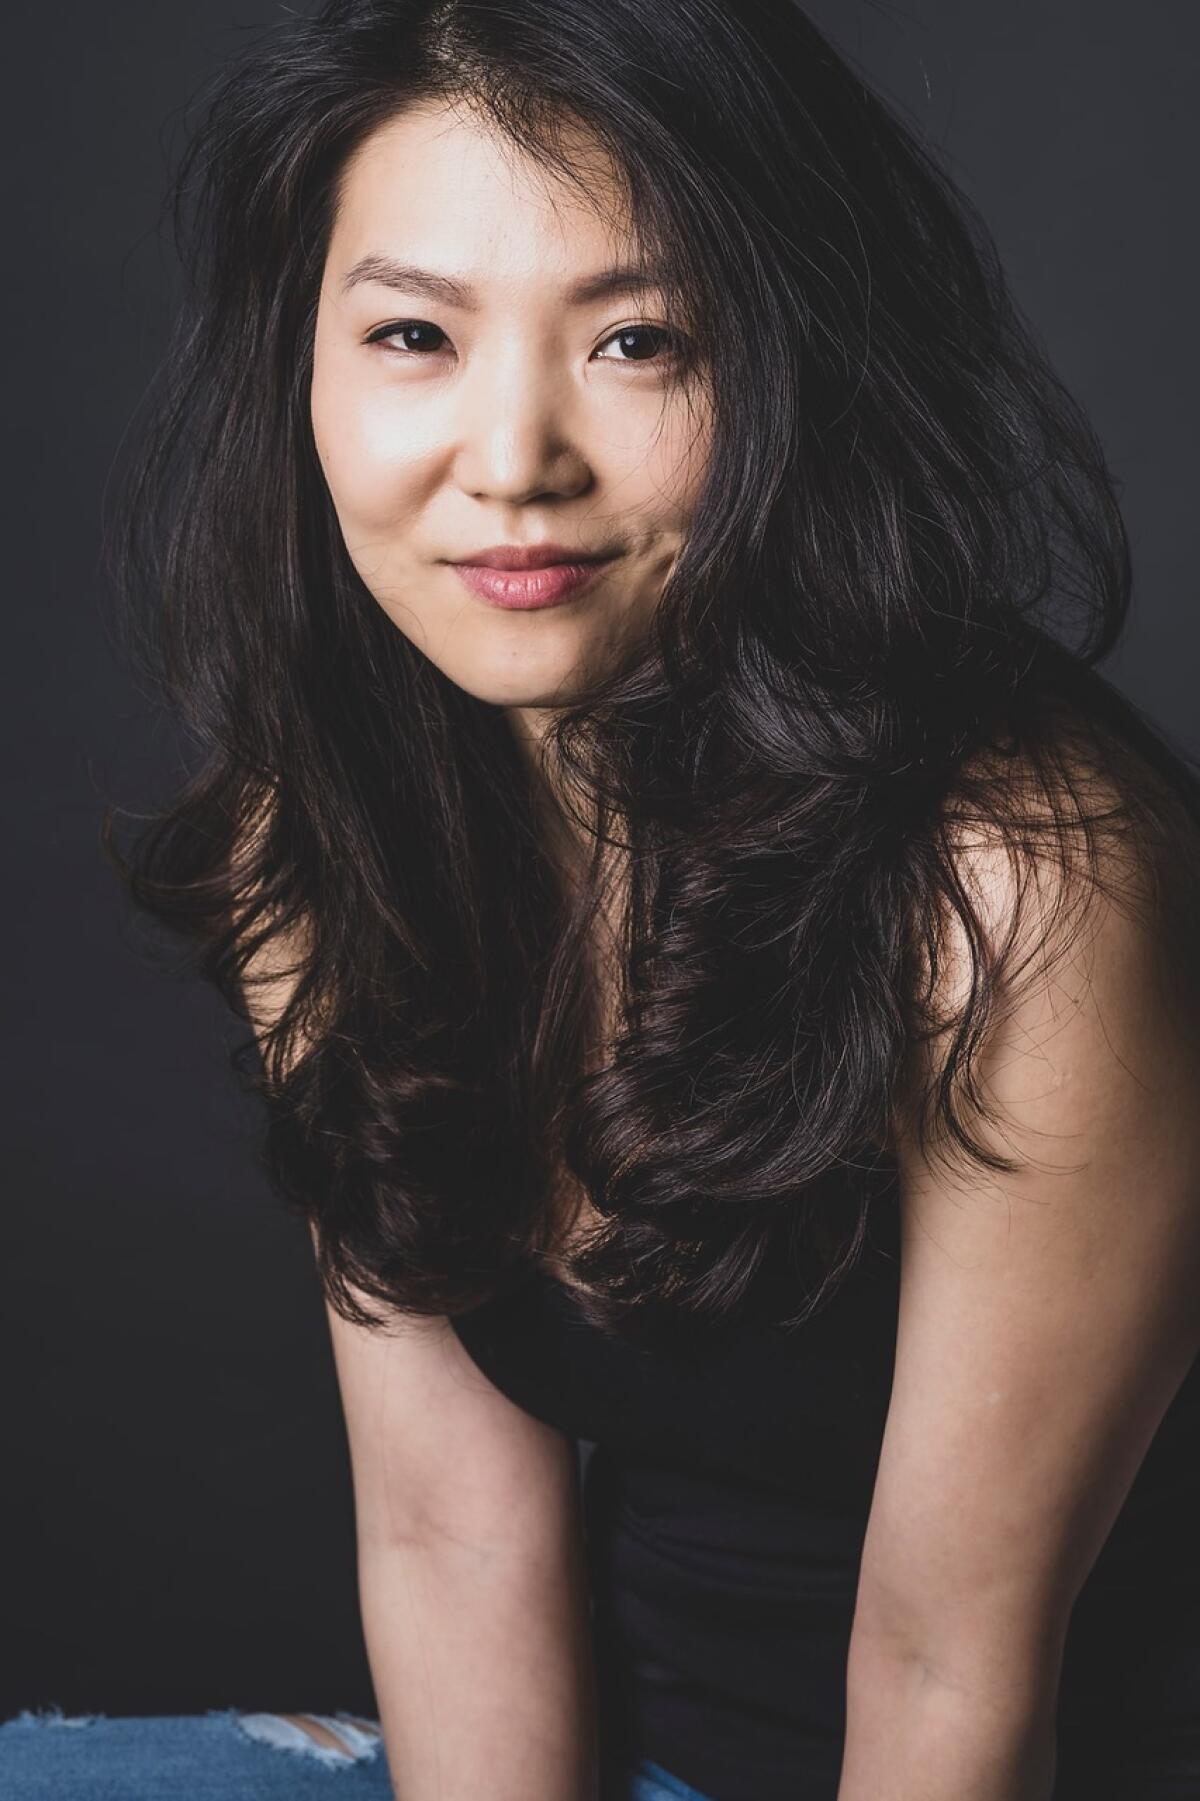 Pianist and author Jeeyoon Kim will appear online courtesy of Warwick's bookstore on Tuesday, Sept. 14.